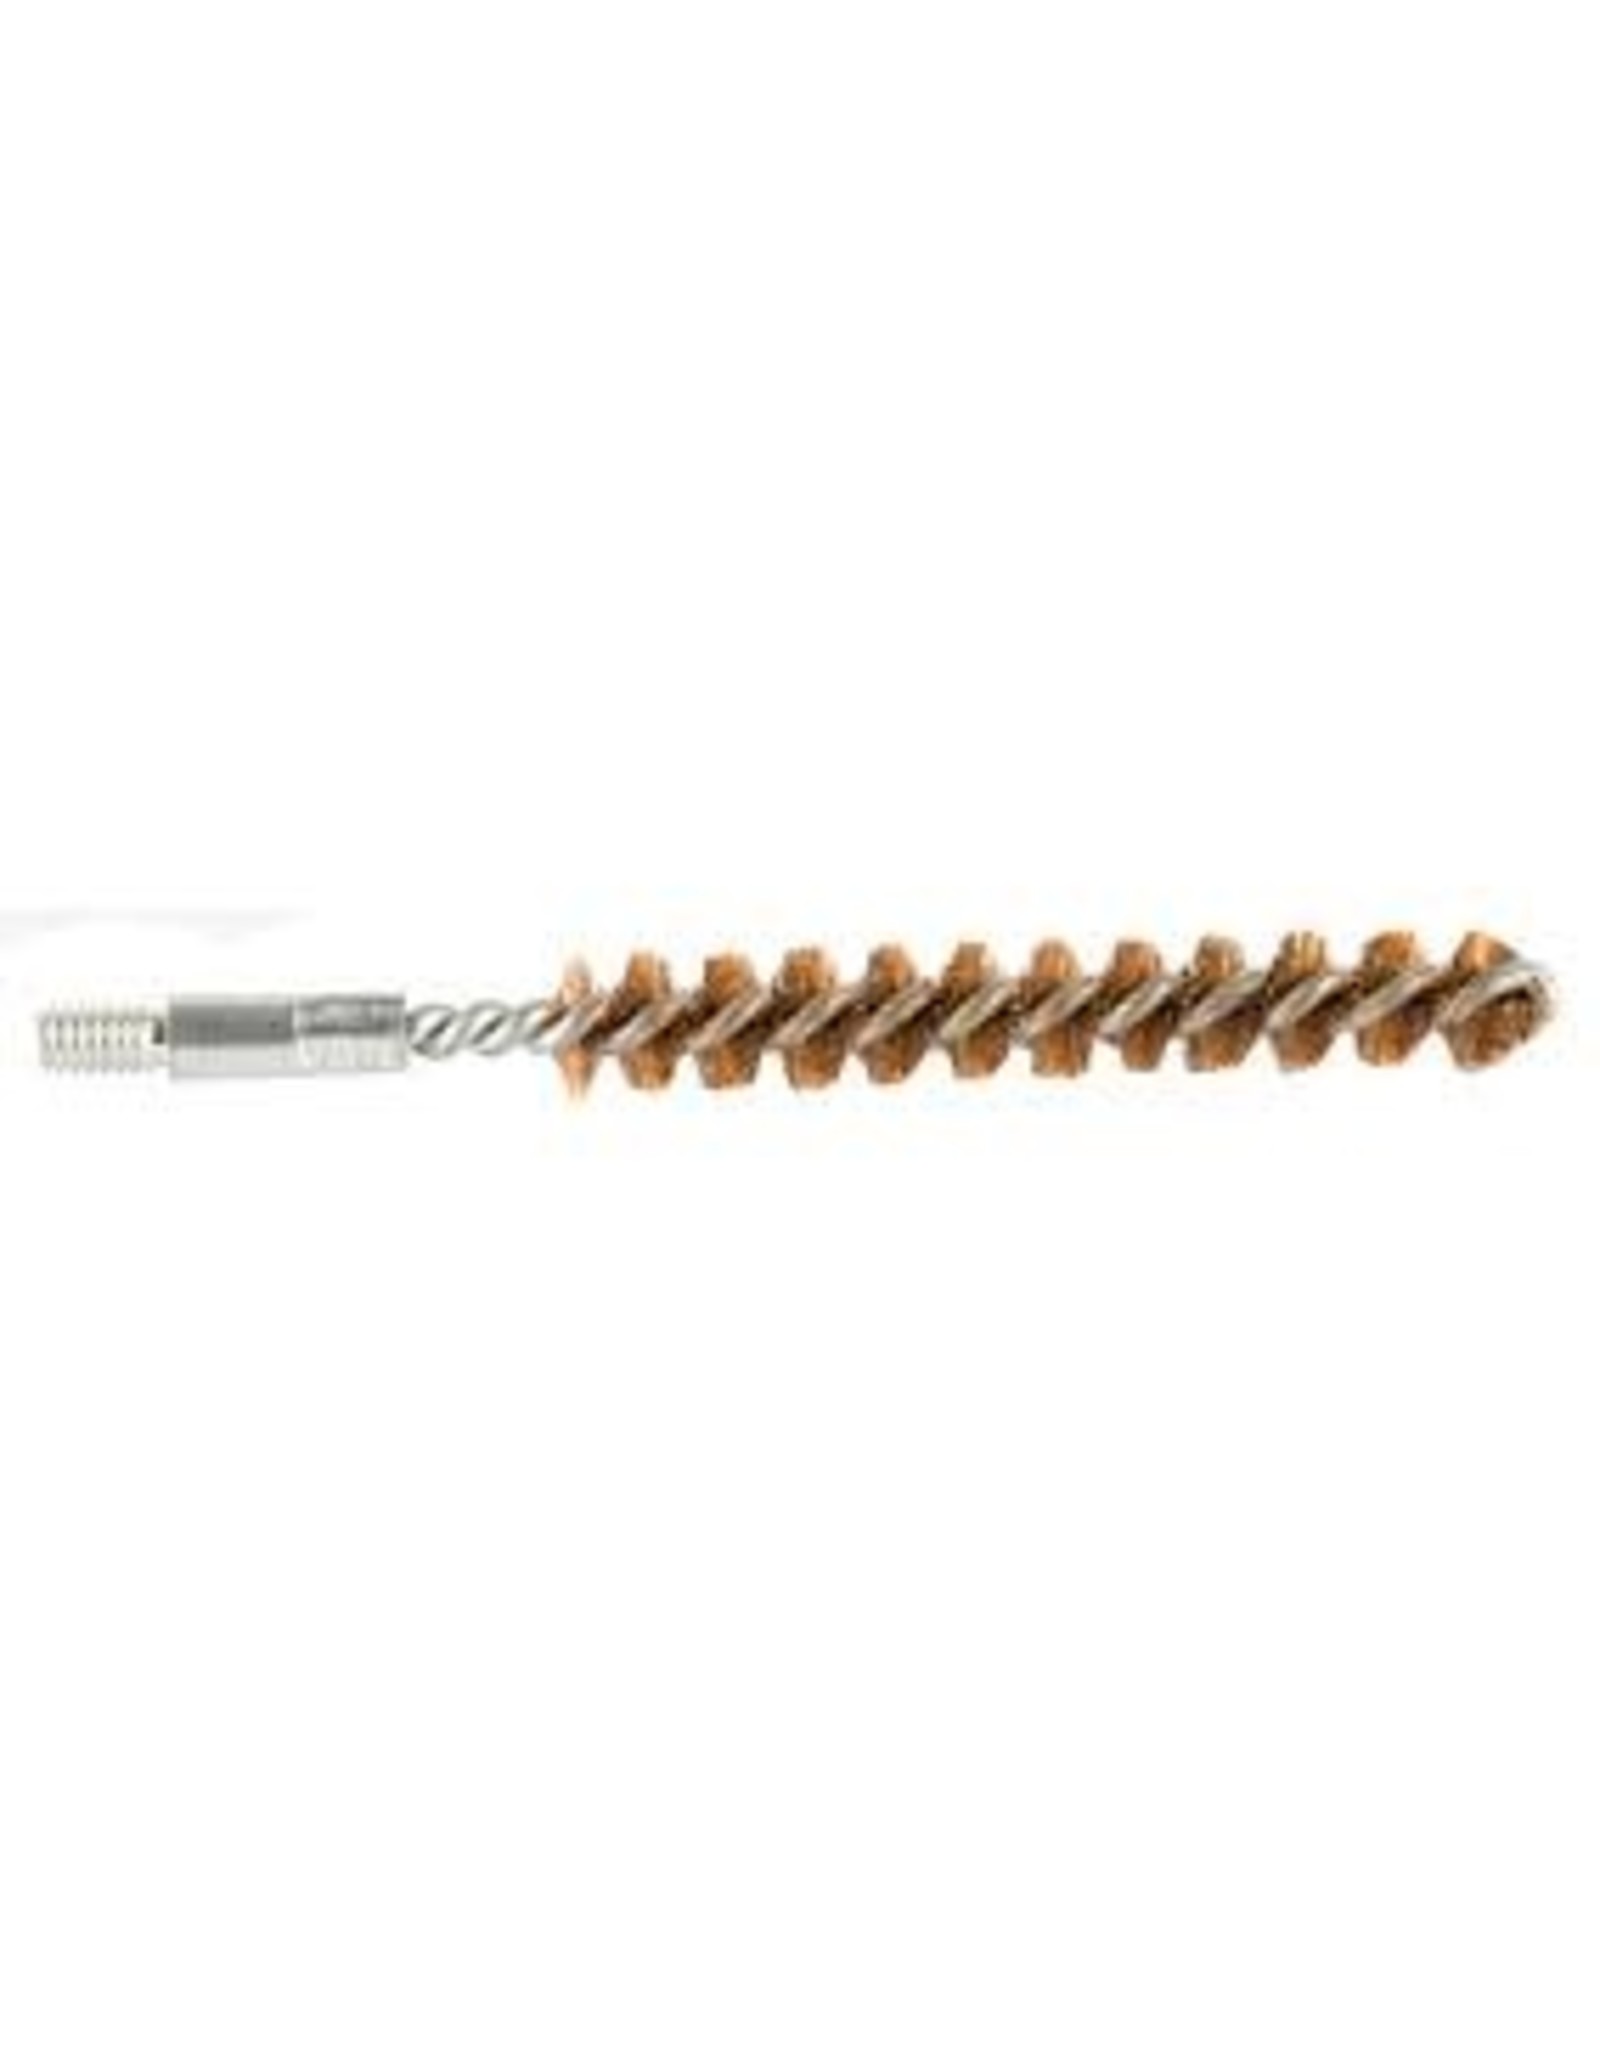 OUTERS Outers Bronze Pistol Brush - .22 Cal